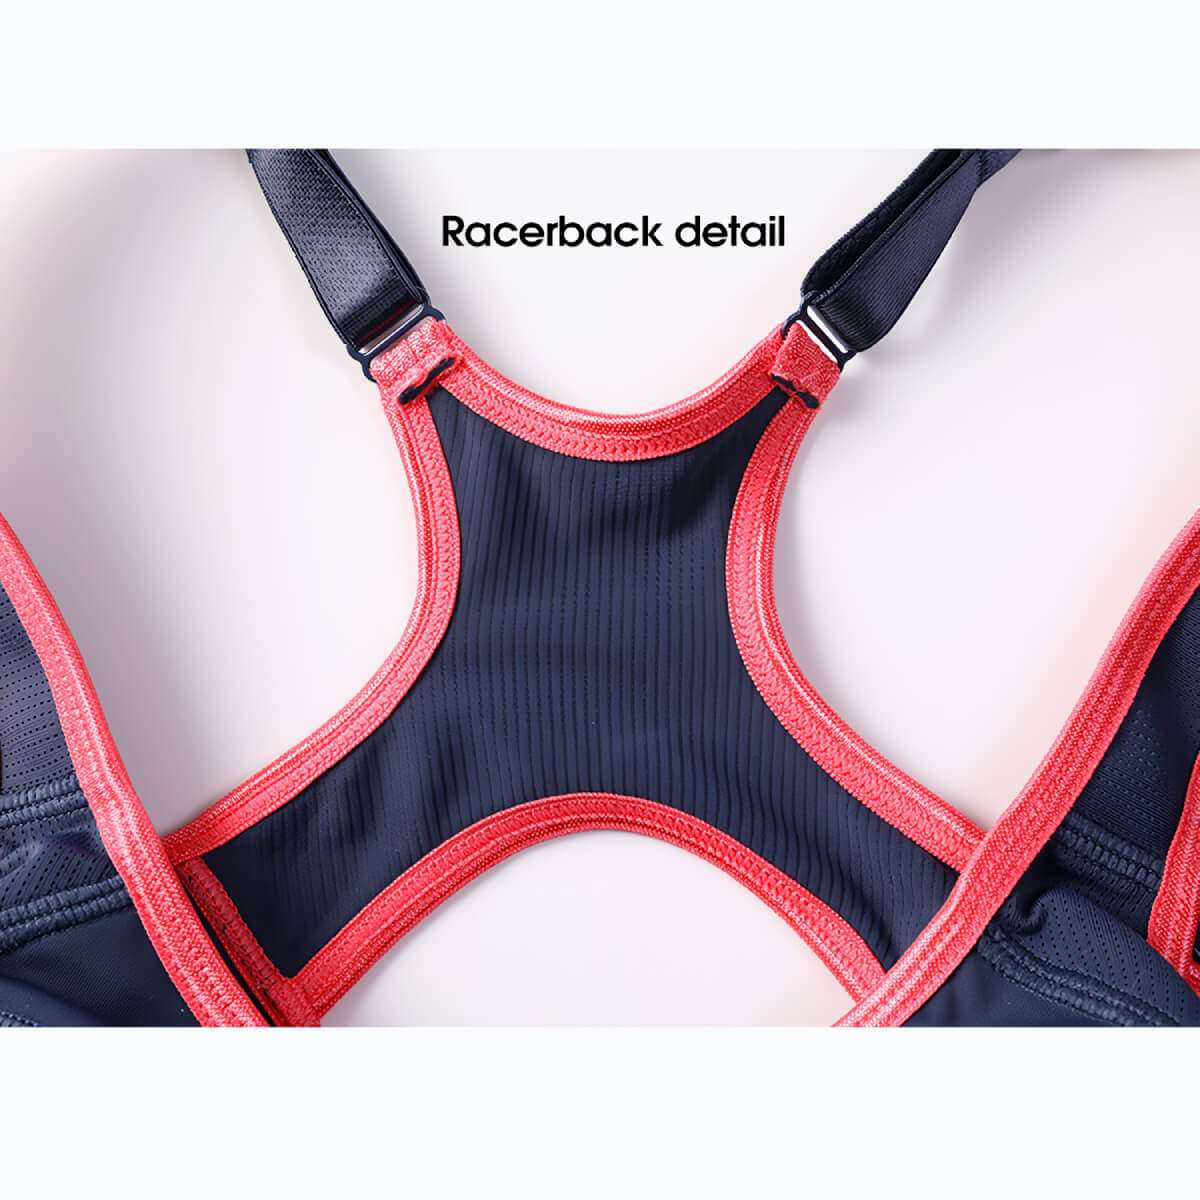 Shock Absorber high support plunge sports bra in black and blue